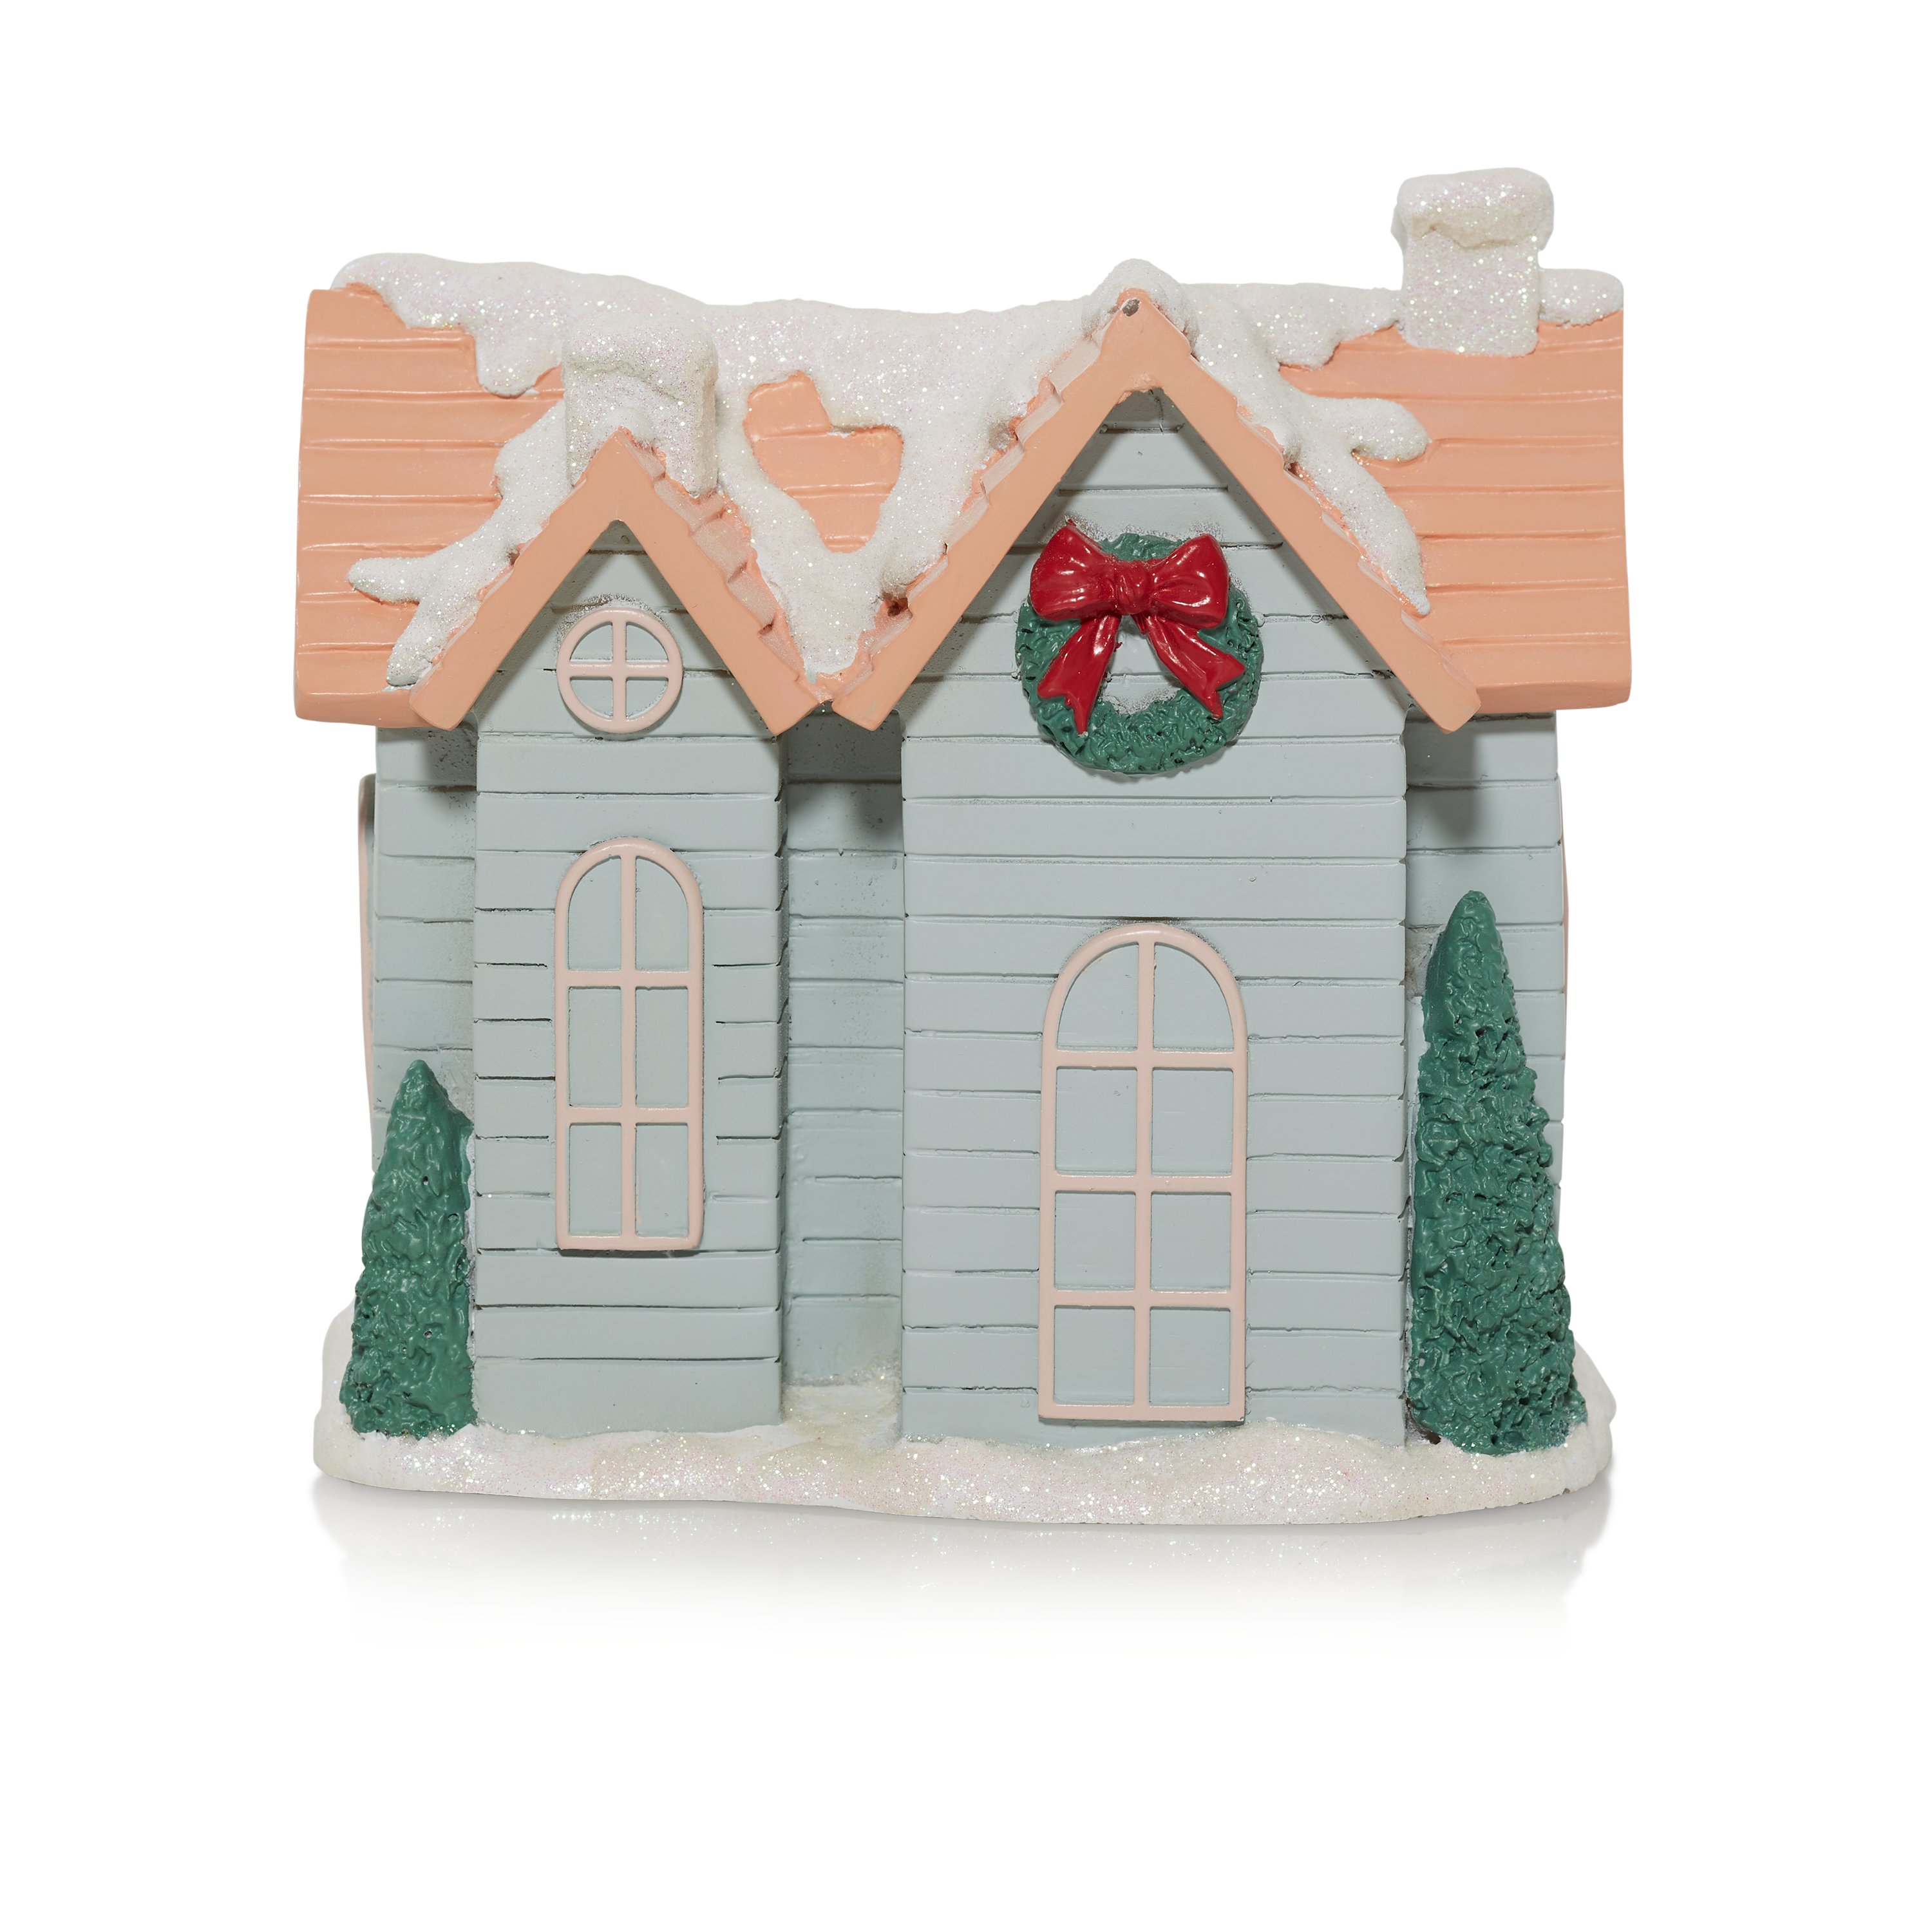 Yankee Candle - What's cuter than a gingerbread house? How